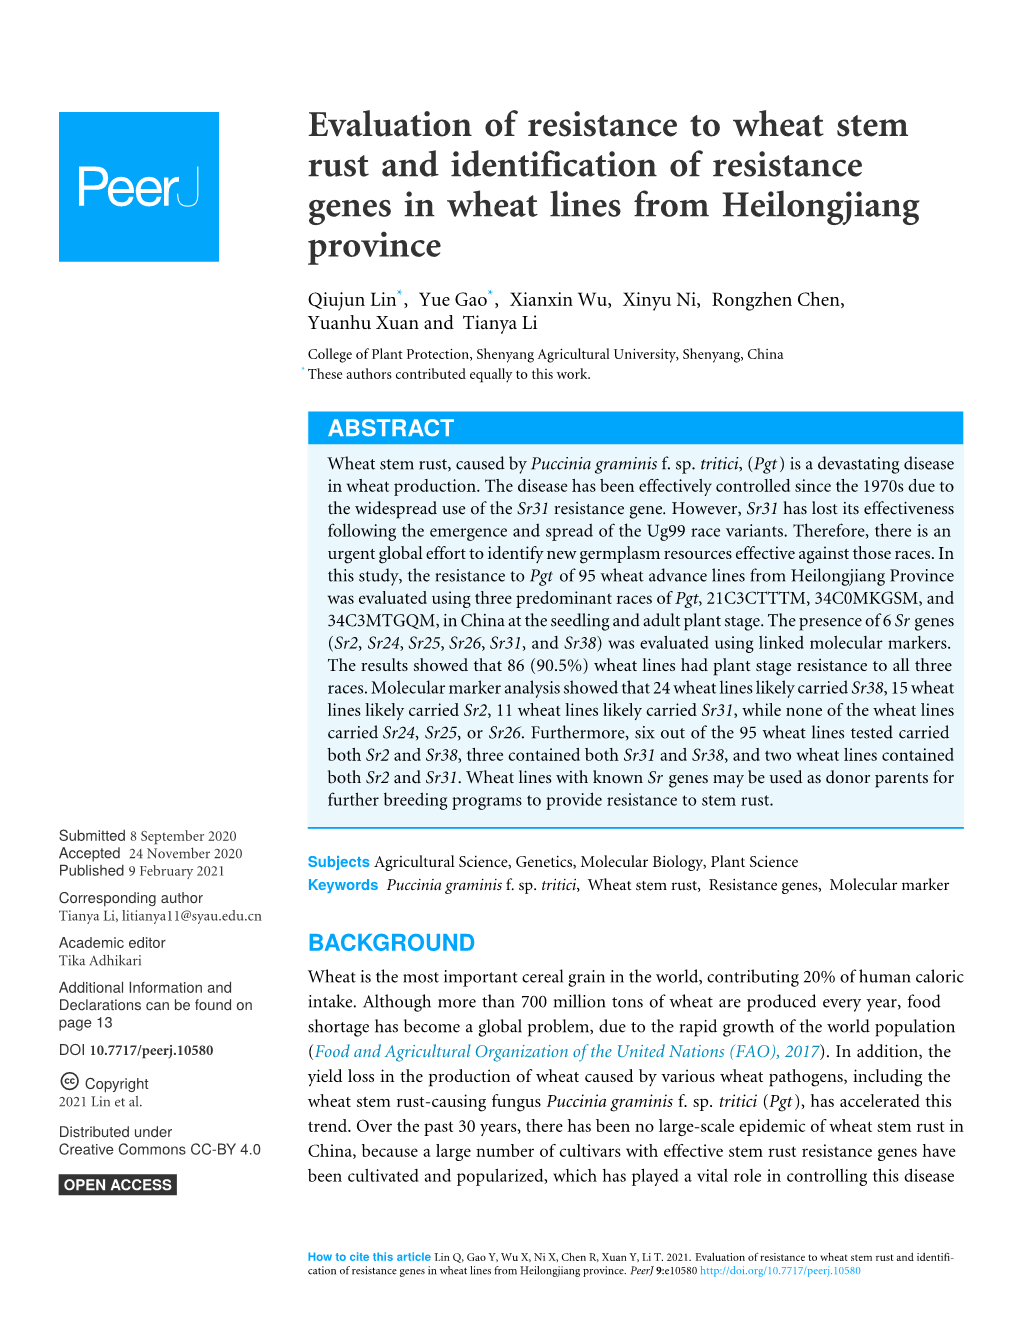 Evaluation of Resistance to Wheat Stem Rust and Identification of Resistance Genes in Wheat Lines from Heilongjiang Province